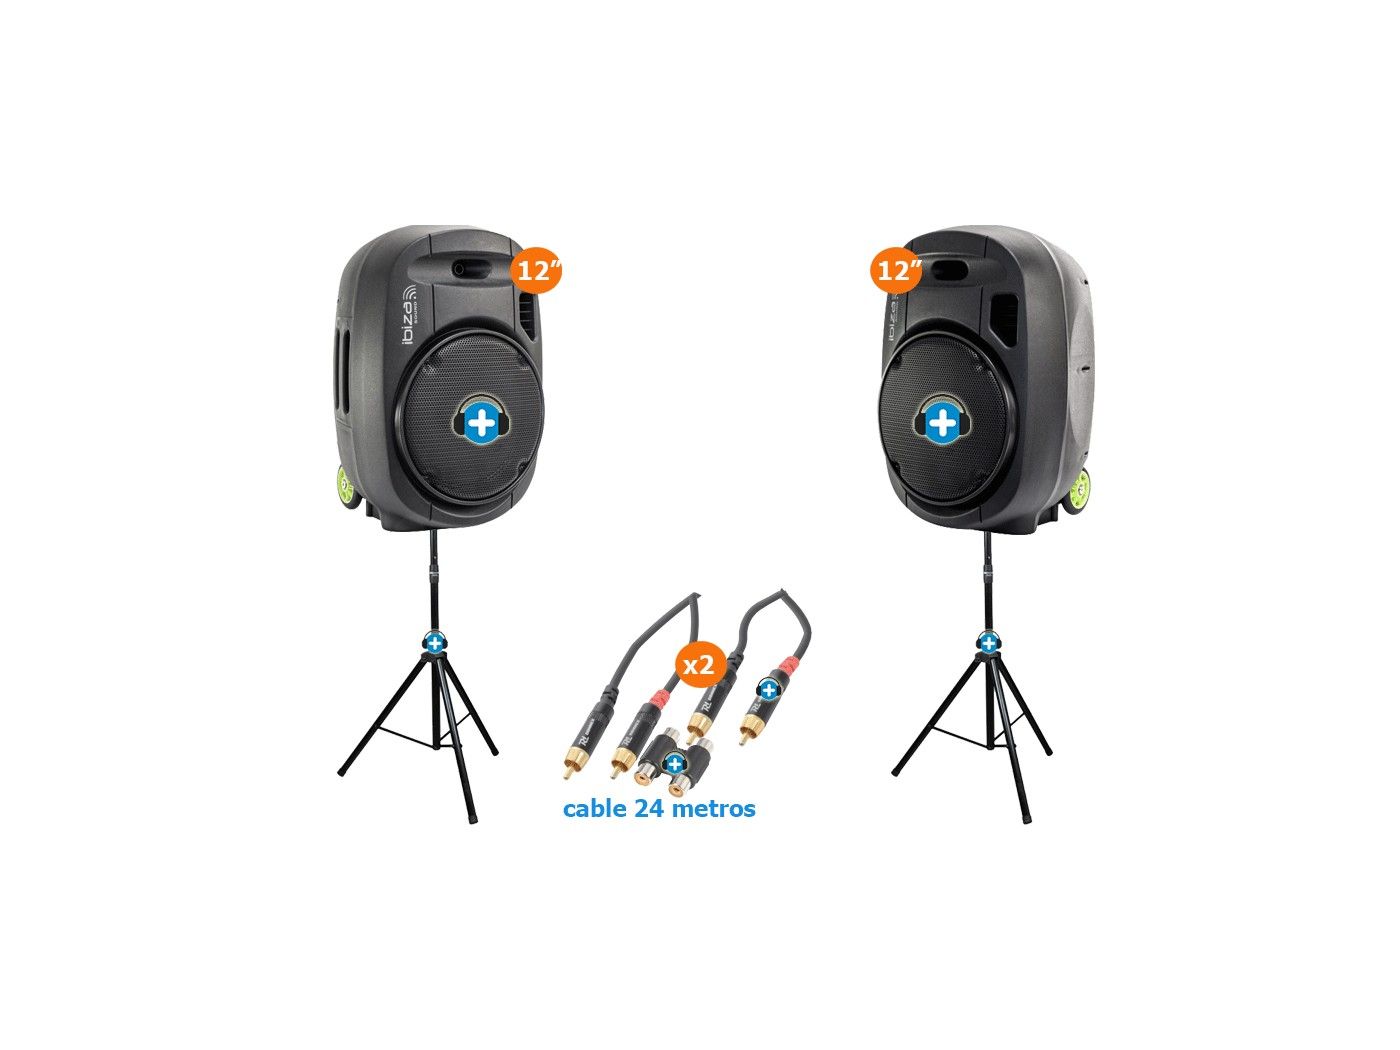 Pack Ibiza Sound Port 12 VHF MkII - 2 altavoces - Pack Event System 12 mkii